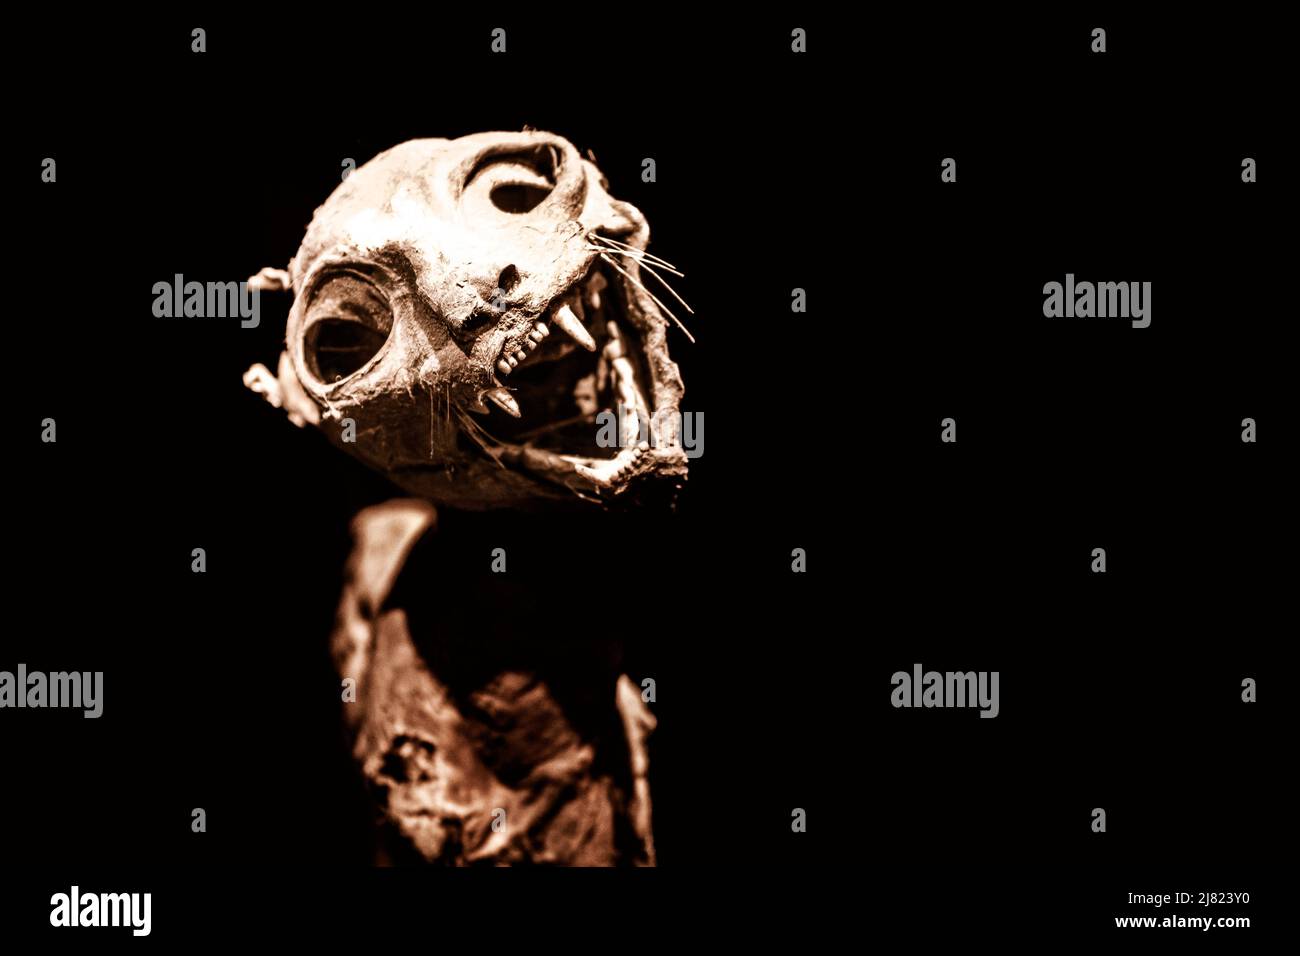 Scary close-up view of a mummified cat isolated on black background, looking at camera Stock Photo